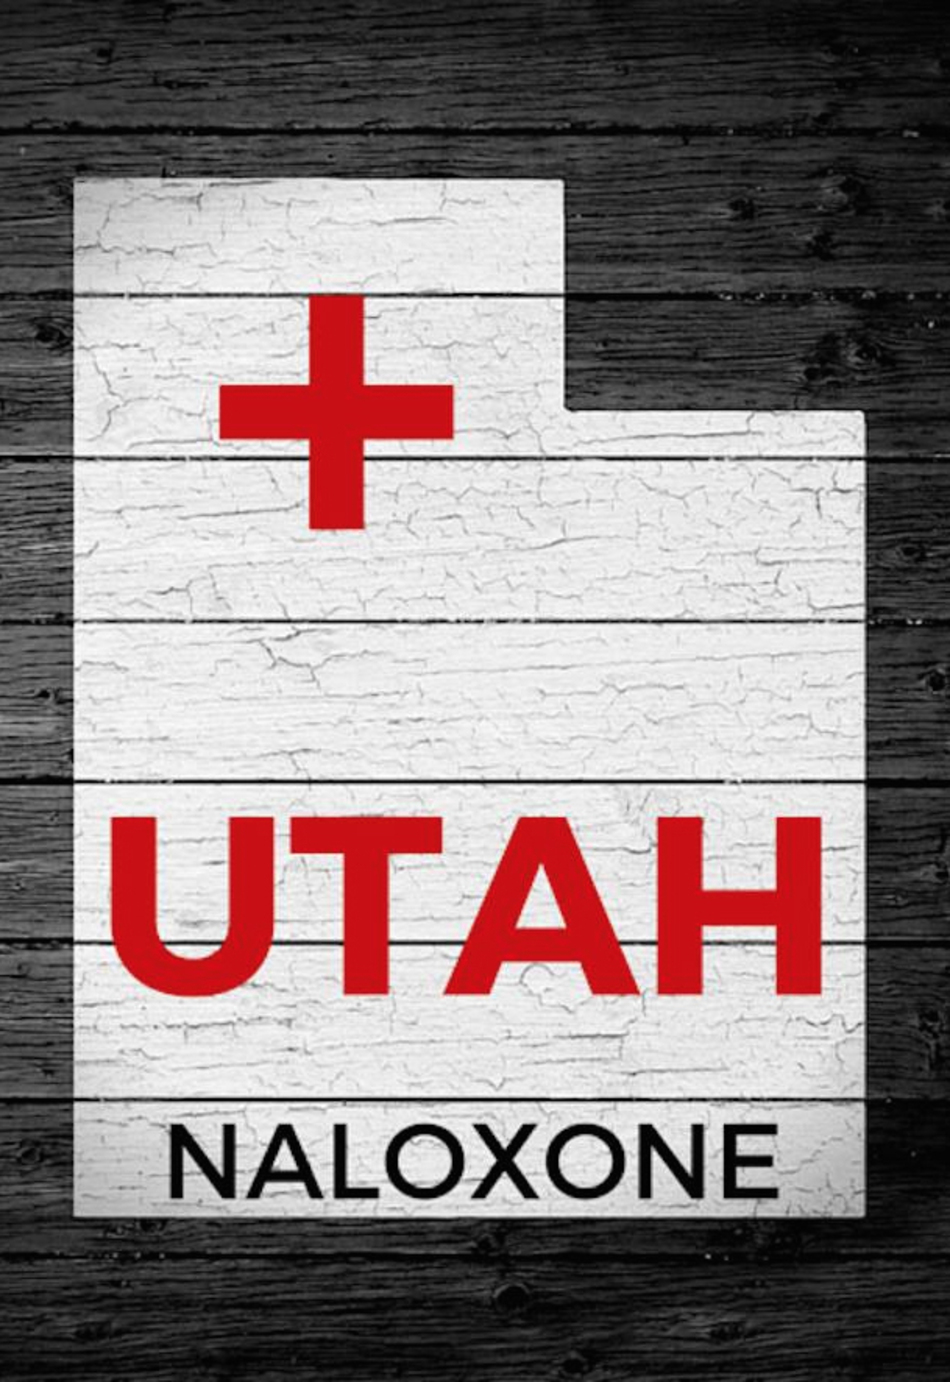 The Controversy Behind Naloxone and How One Utah Group Promotes Its Usage to Save Lives